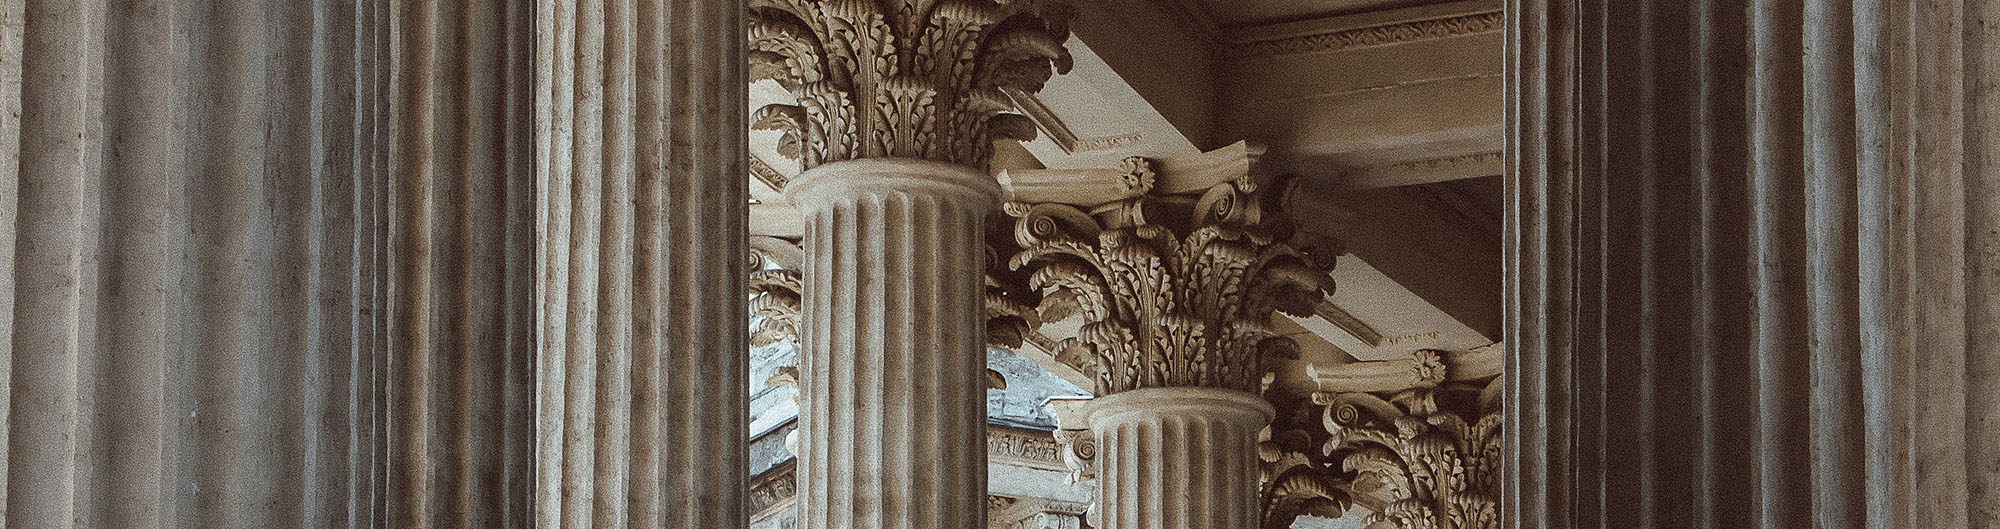 Details of pillars of government building